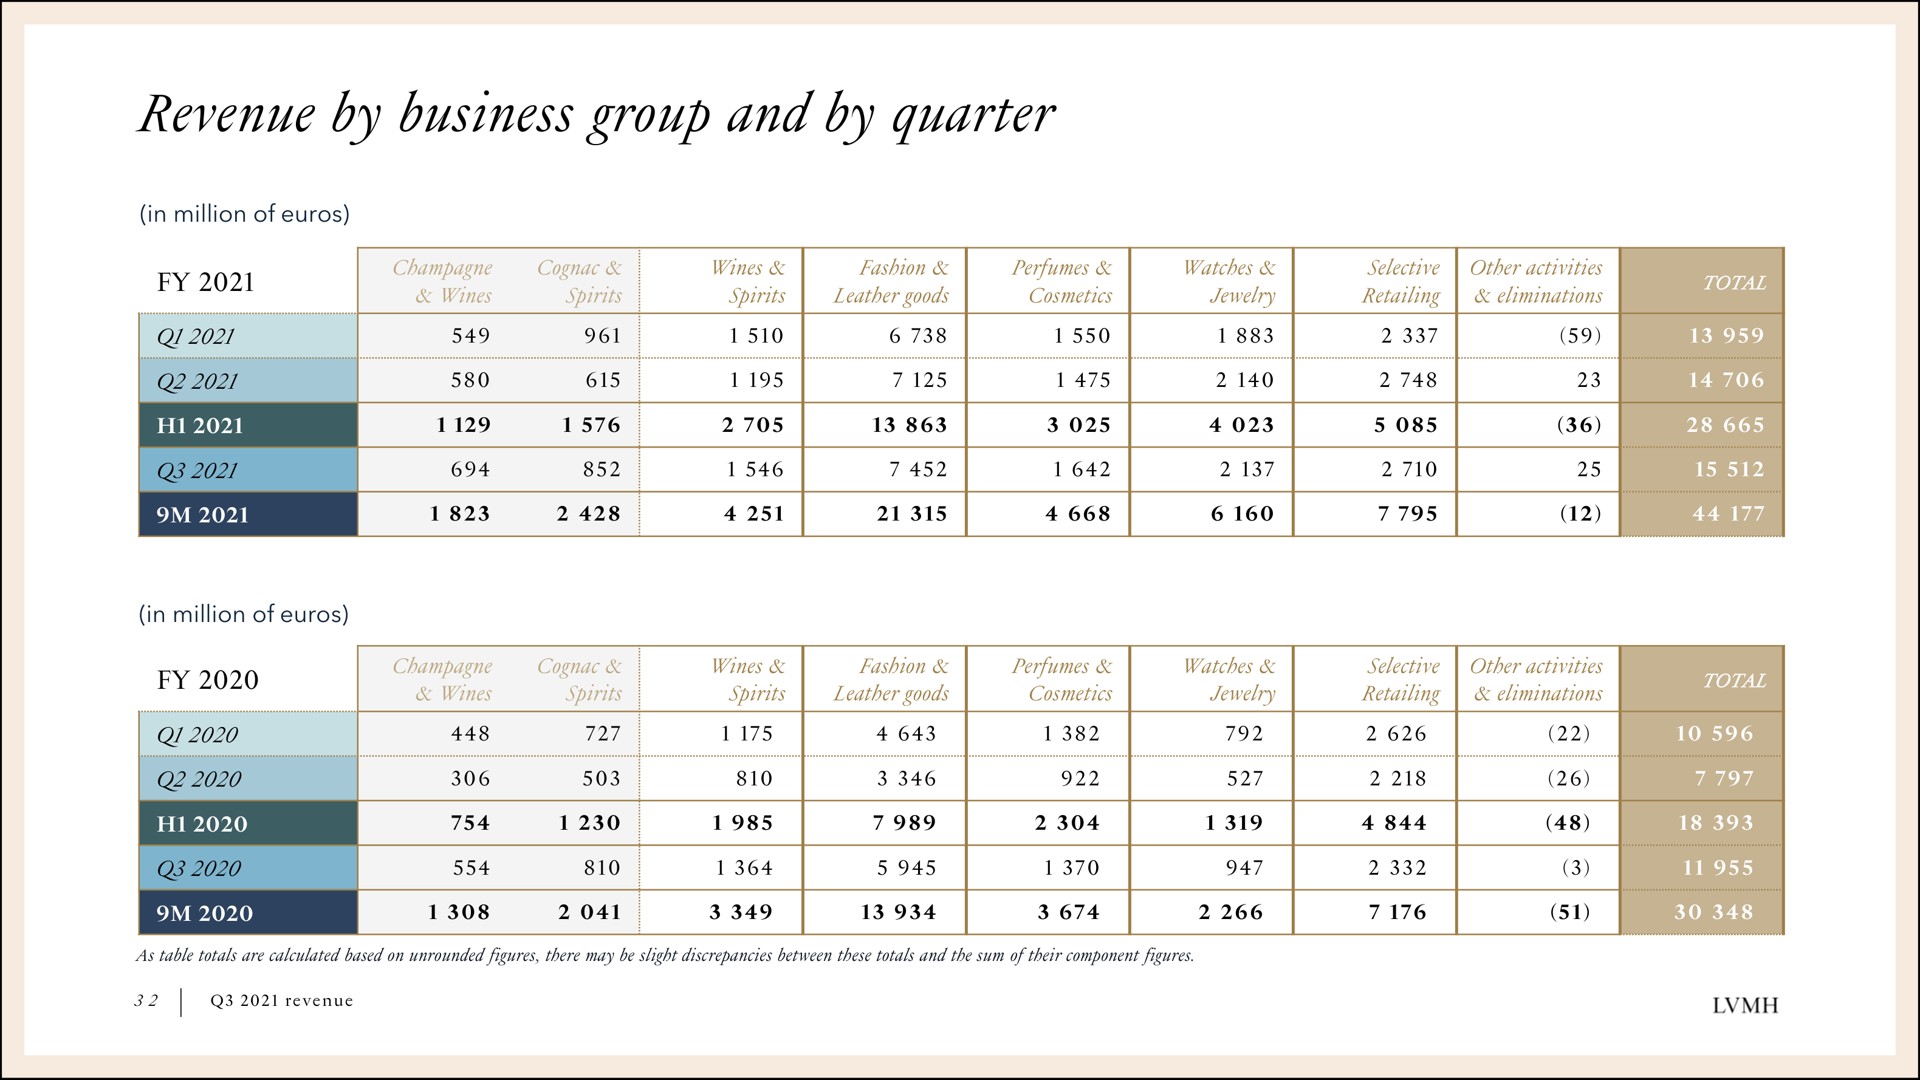 revenue by business group and by quarter | LVMH